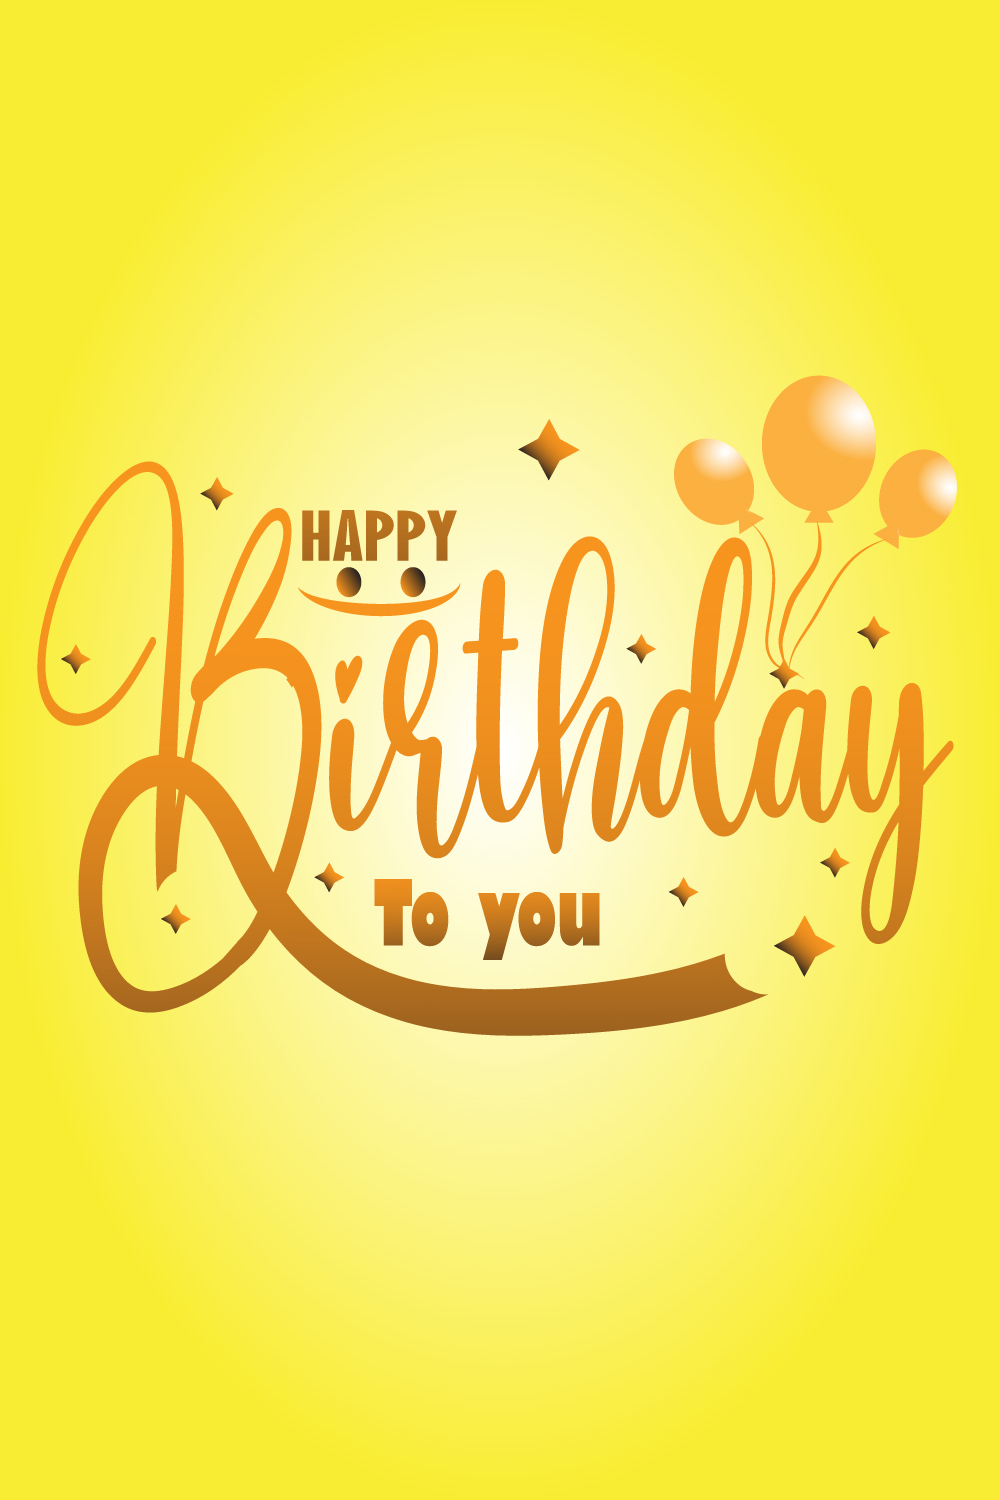 Happy Birth Day vector design for your business pinterest preview image.